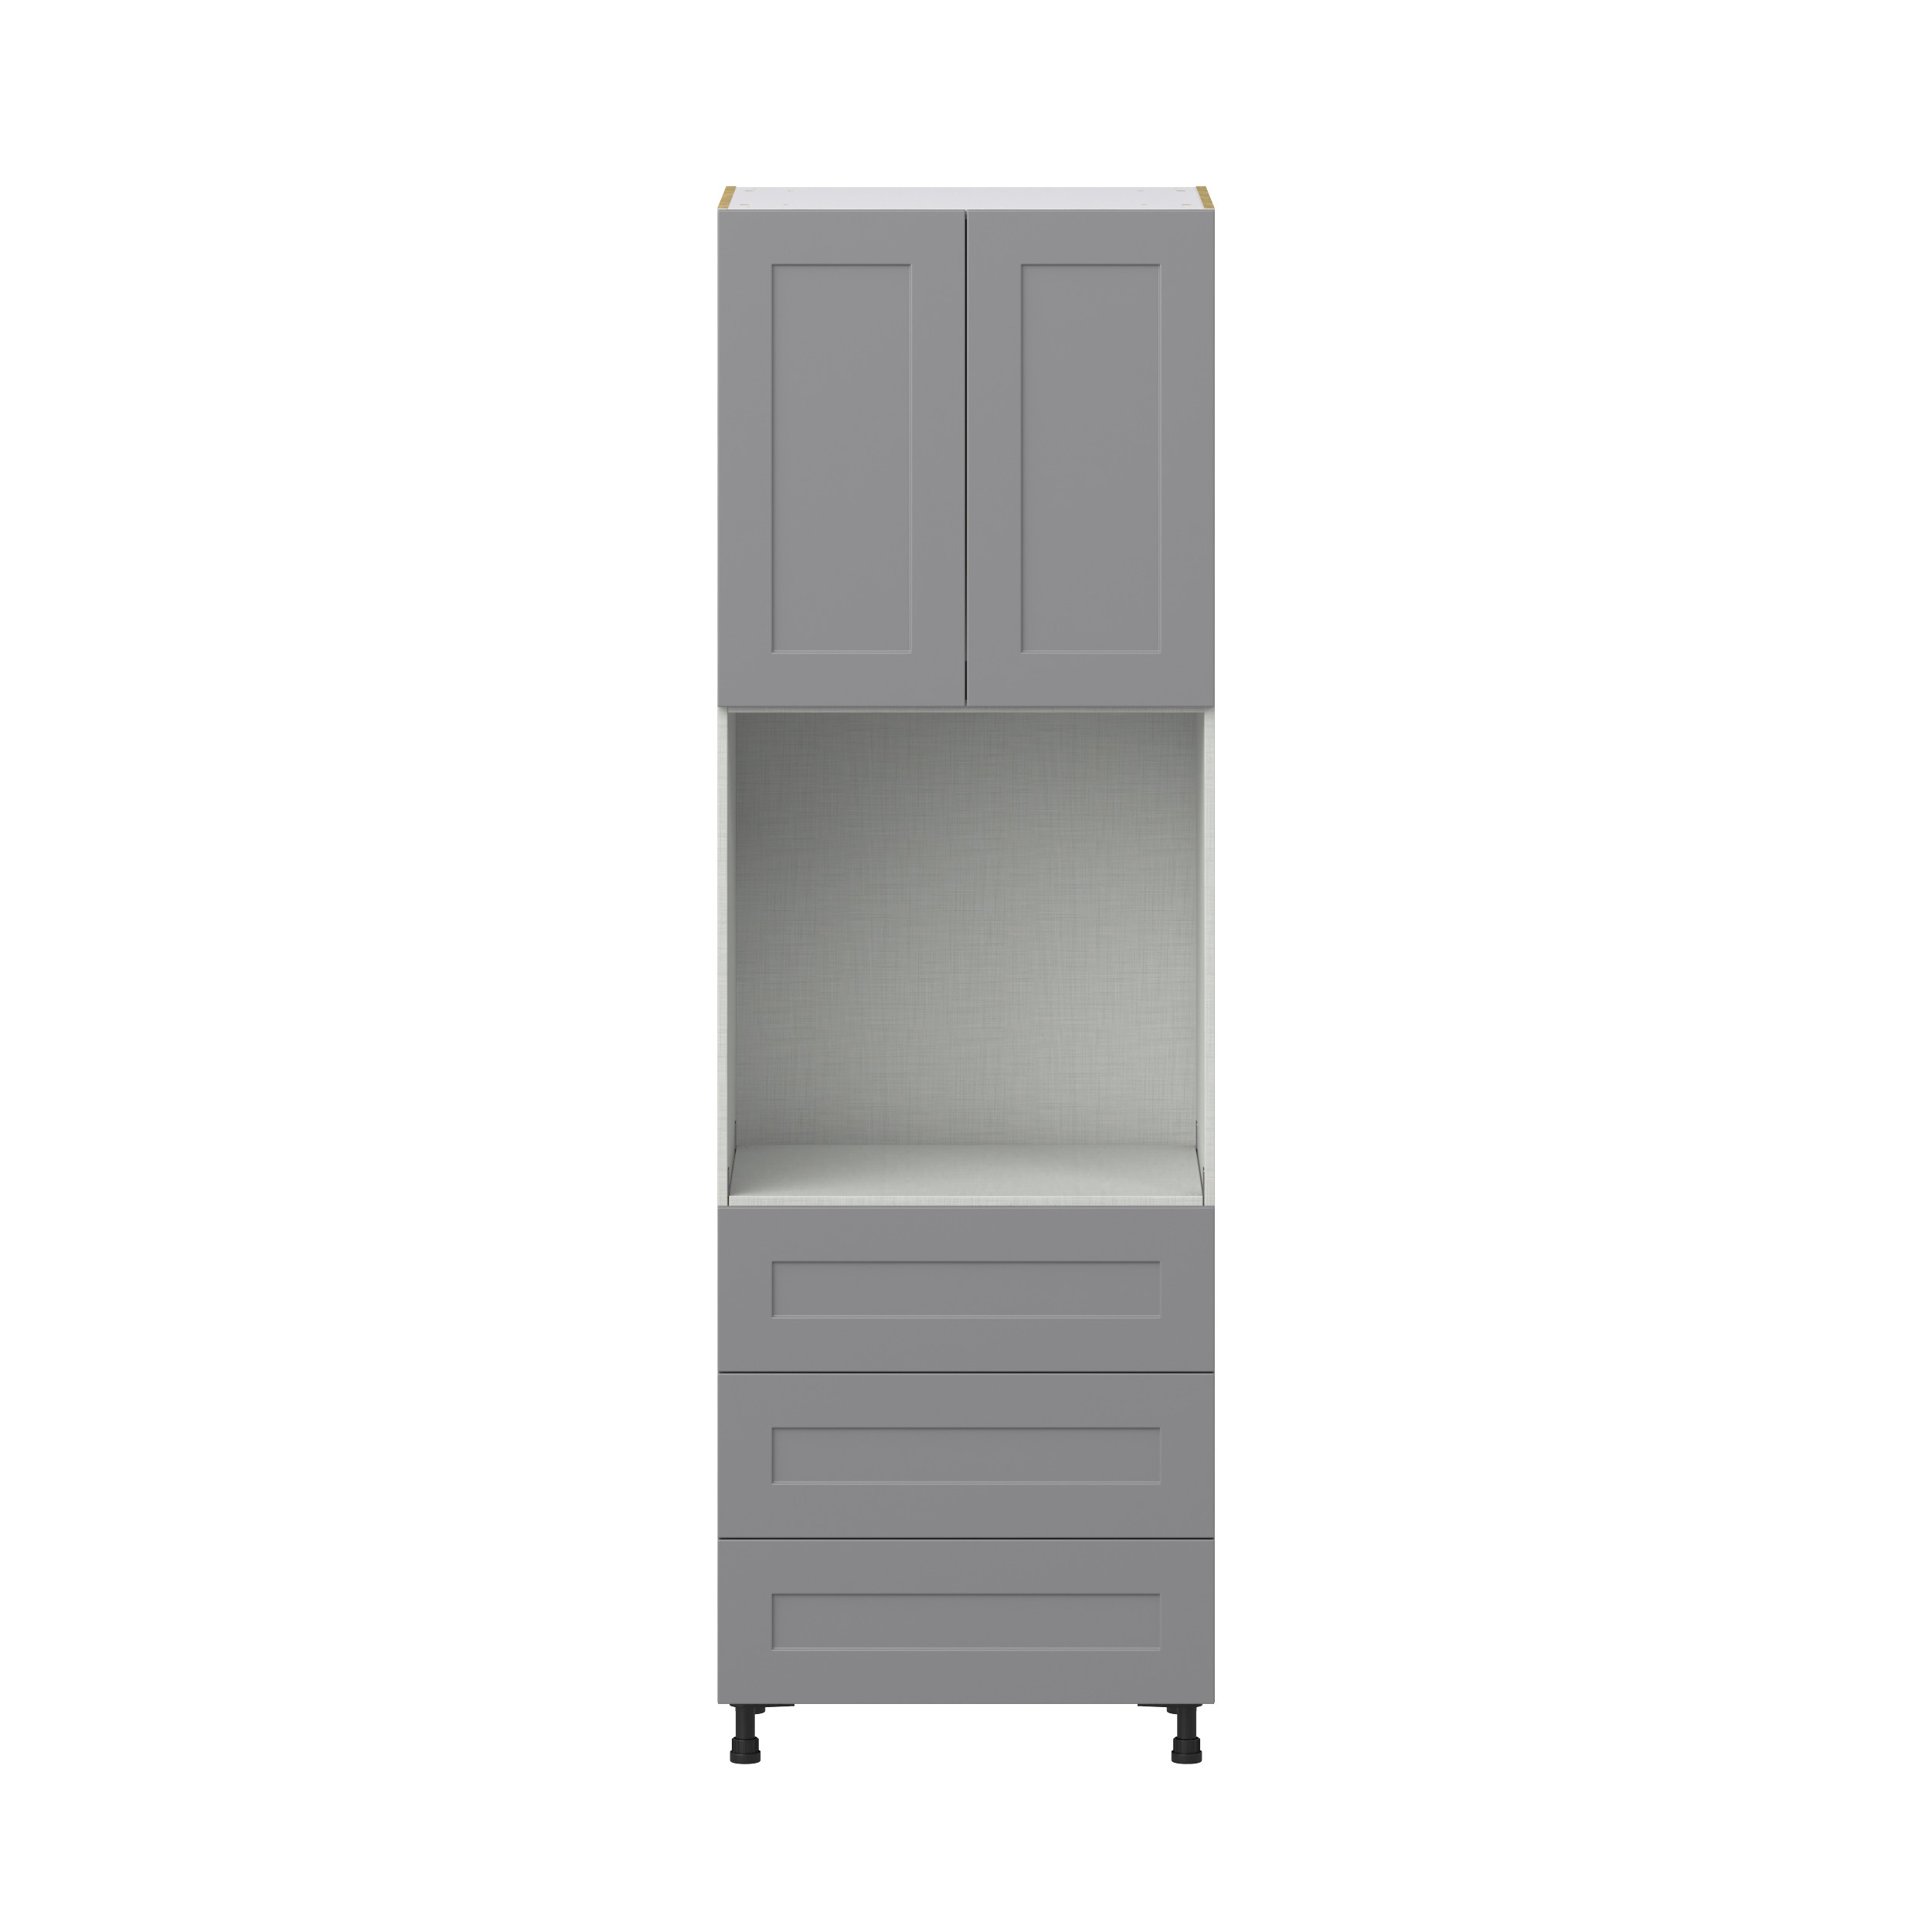 Willow Painted Slate Gray Shaker Assembled Pantry Single Oven Cabinet with 3 Even Drawers (30 in. W X 94.5 in. H X 24 in. D)